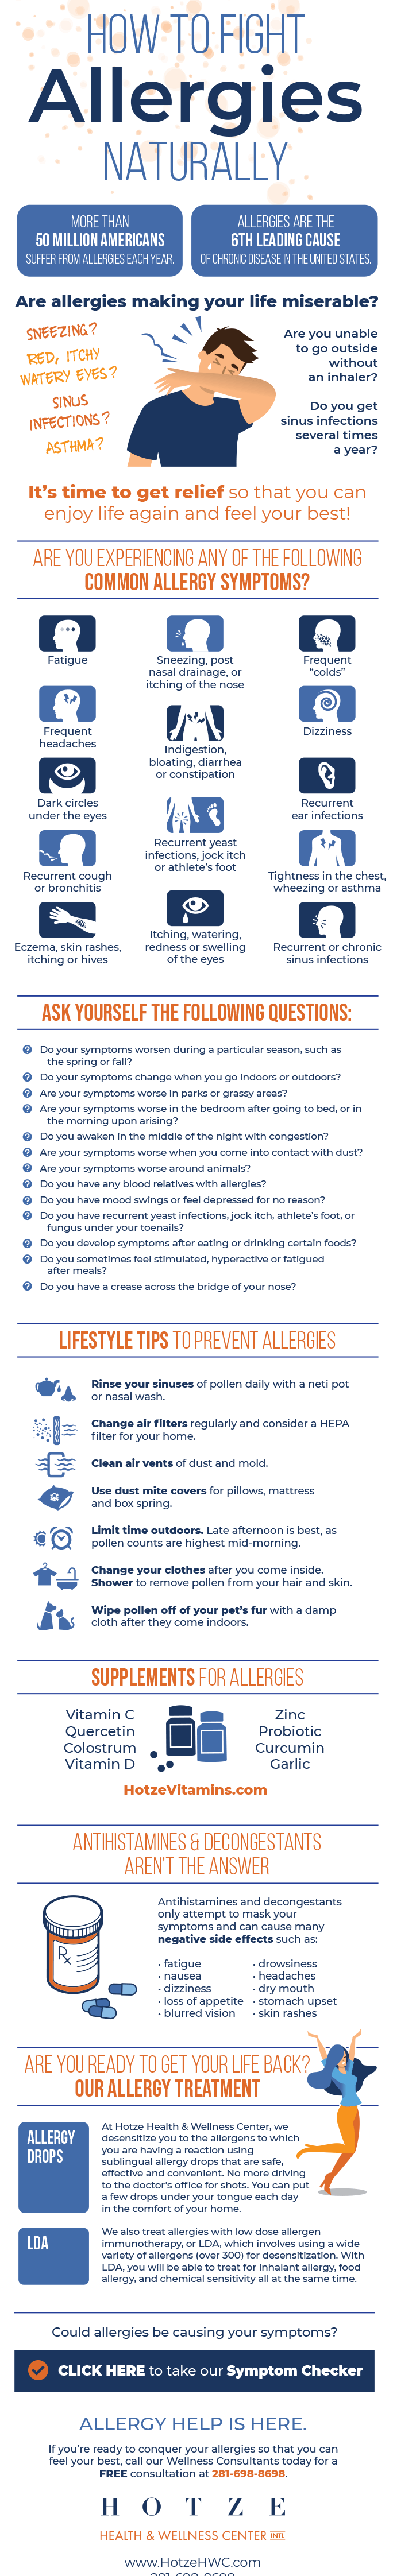 How to Fight Allergies Naturally Infographic